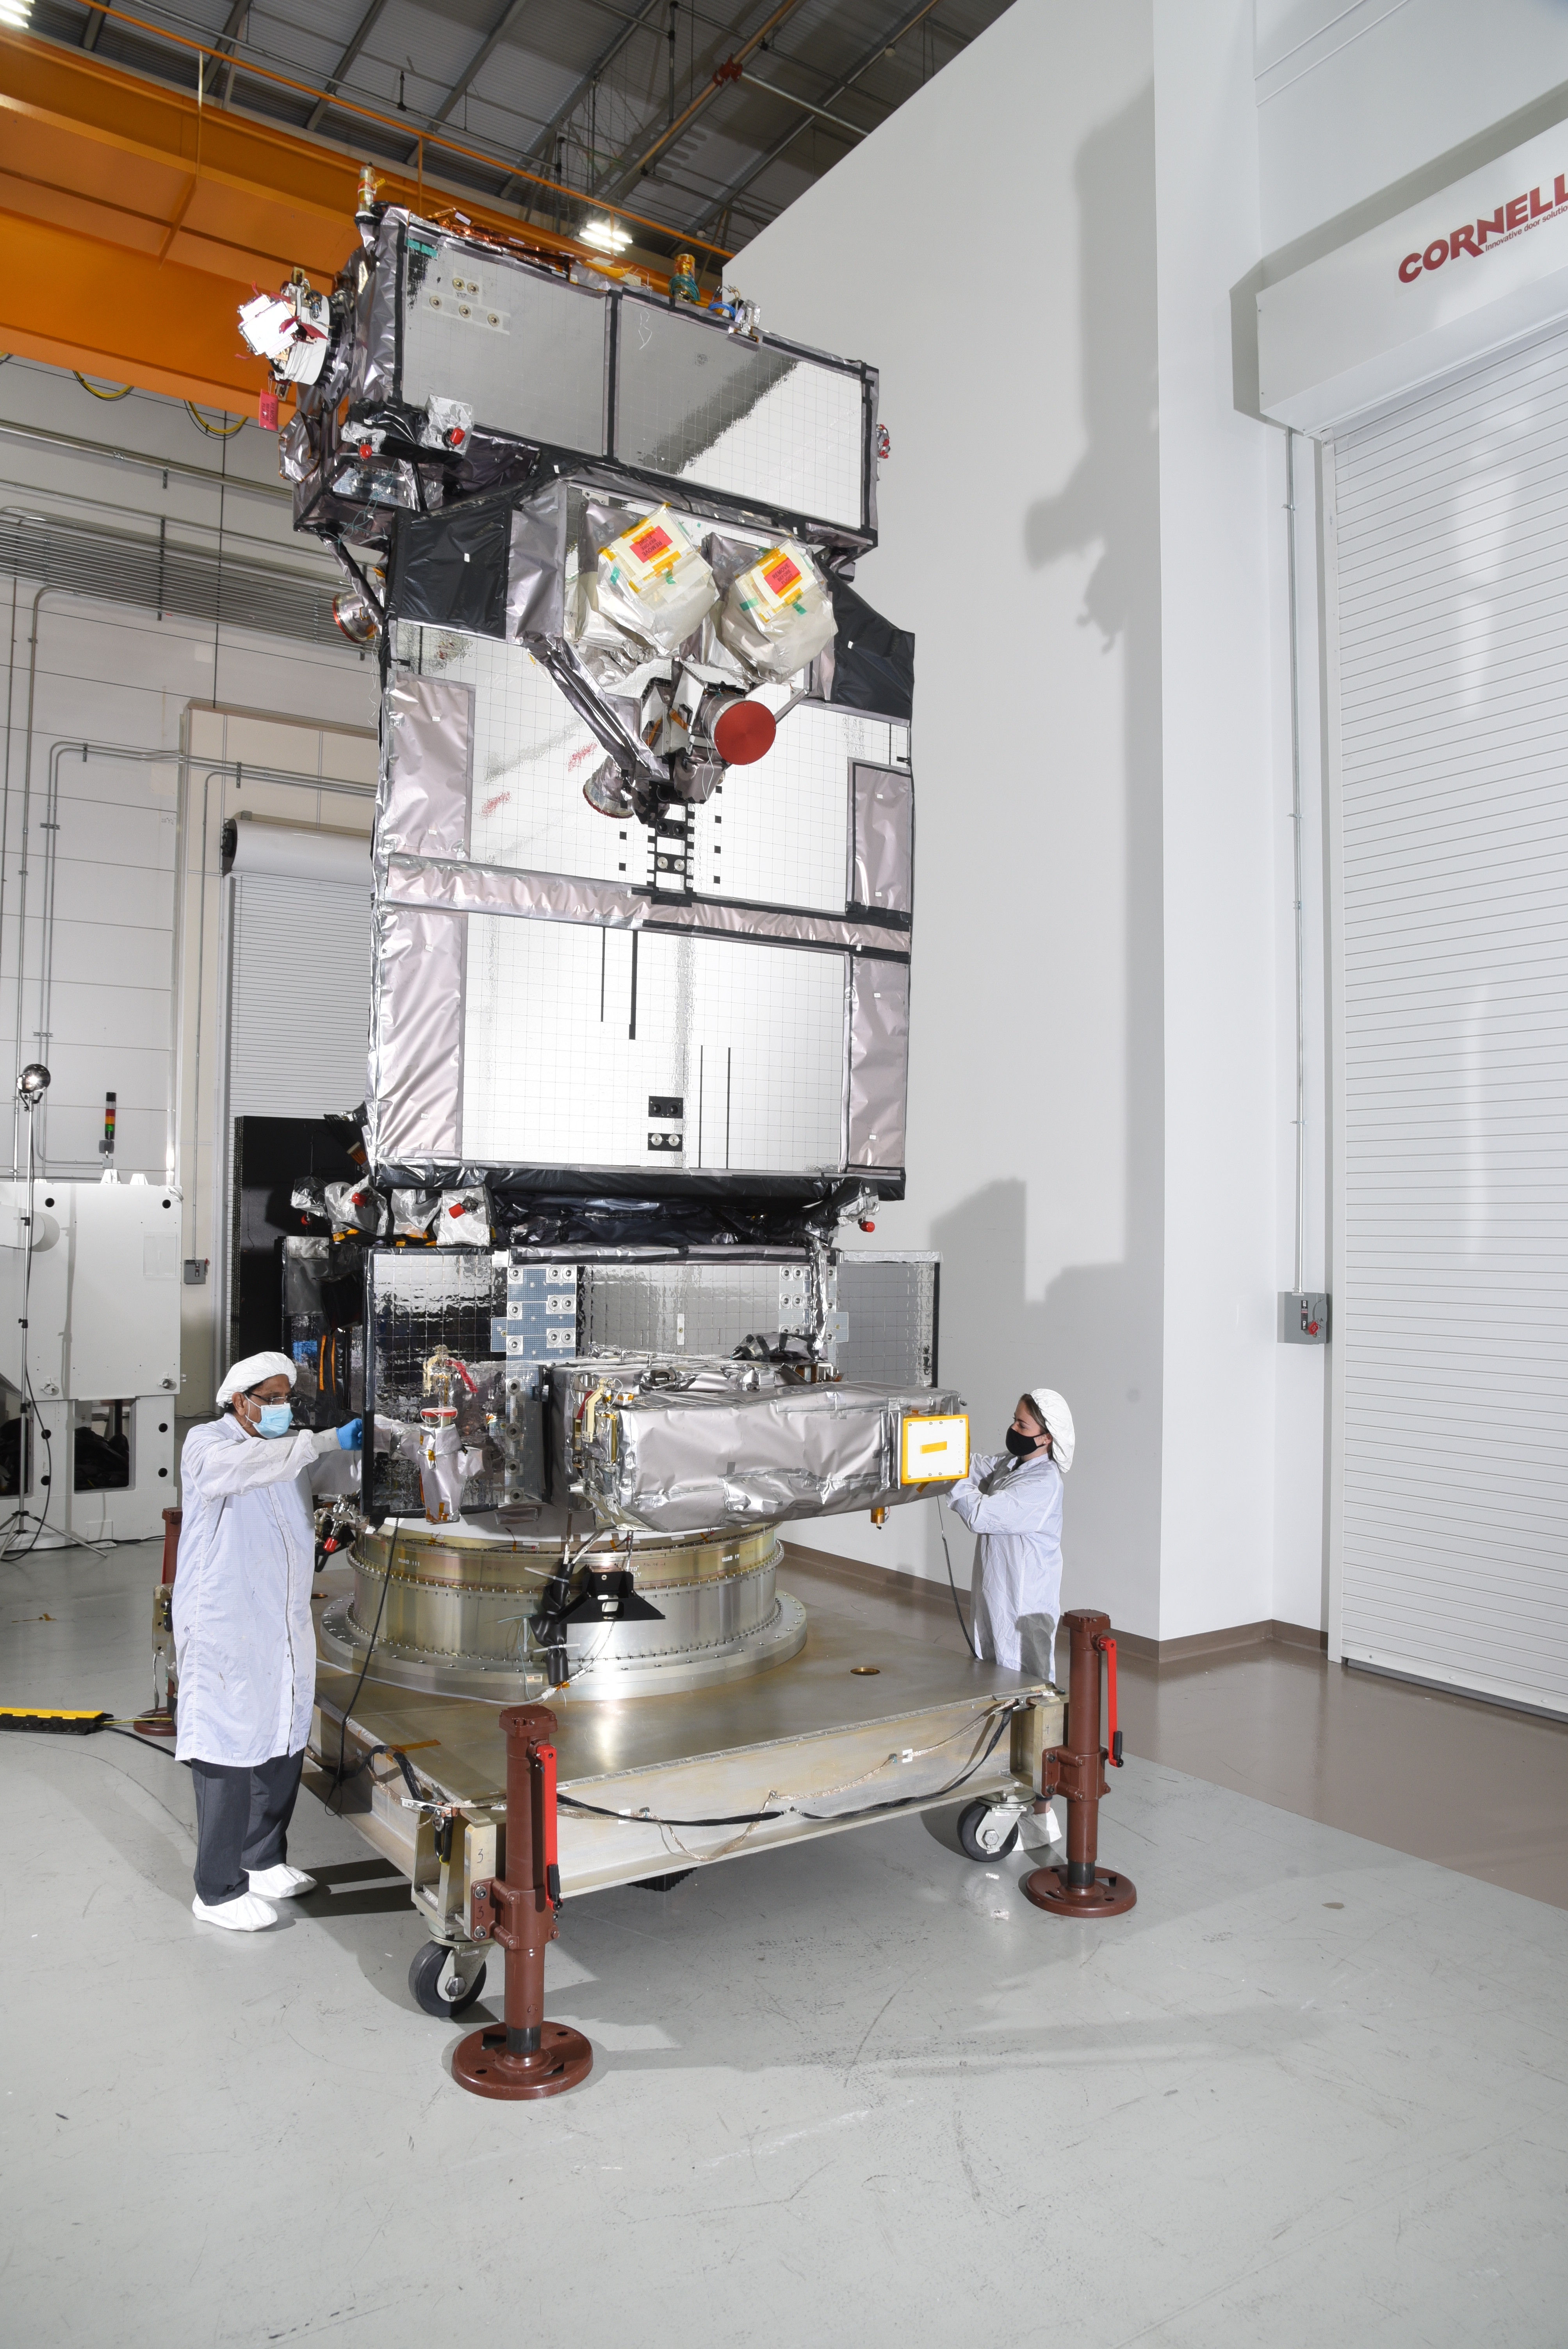 A person wearing a white lab coat, black pants, a mask and gloves examines a large machine from the left and another person wearing a lab coast does the same from the right side.  